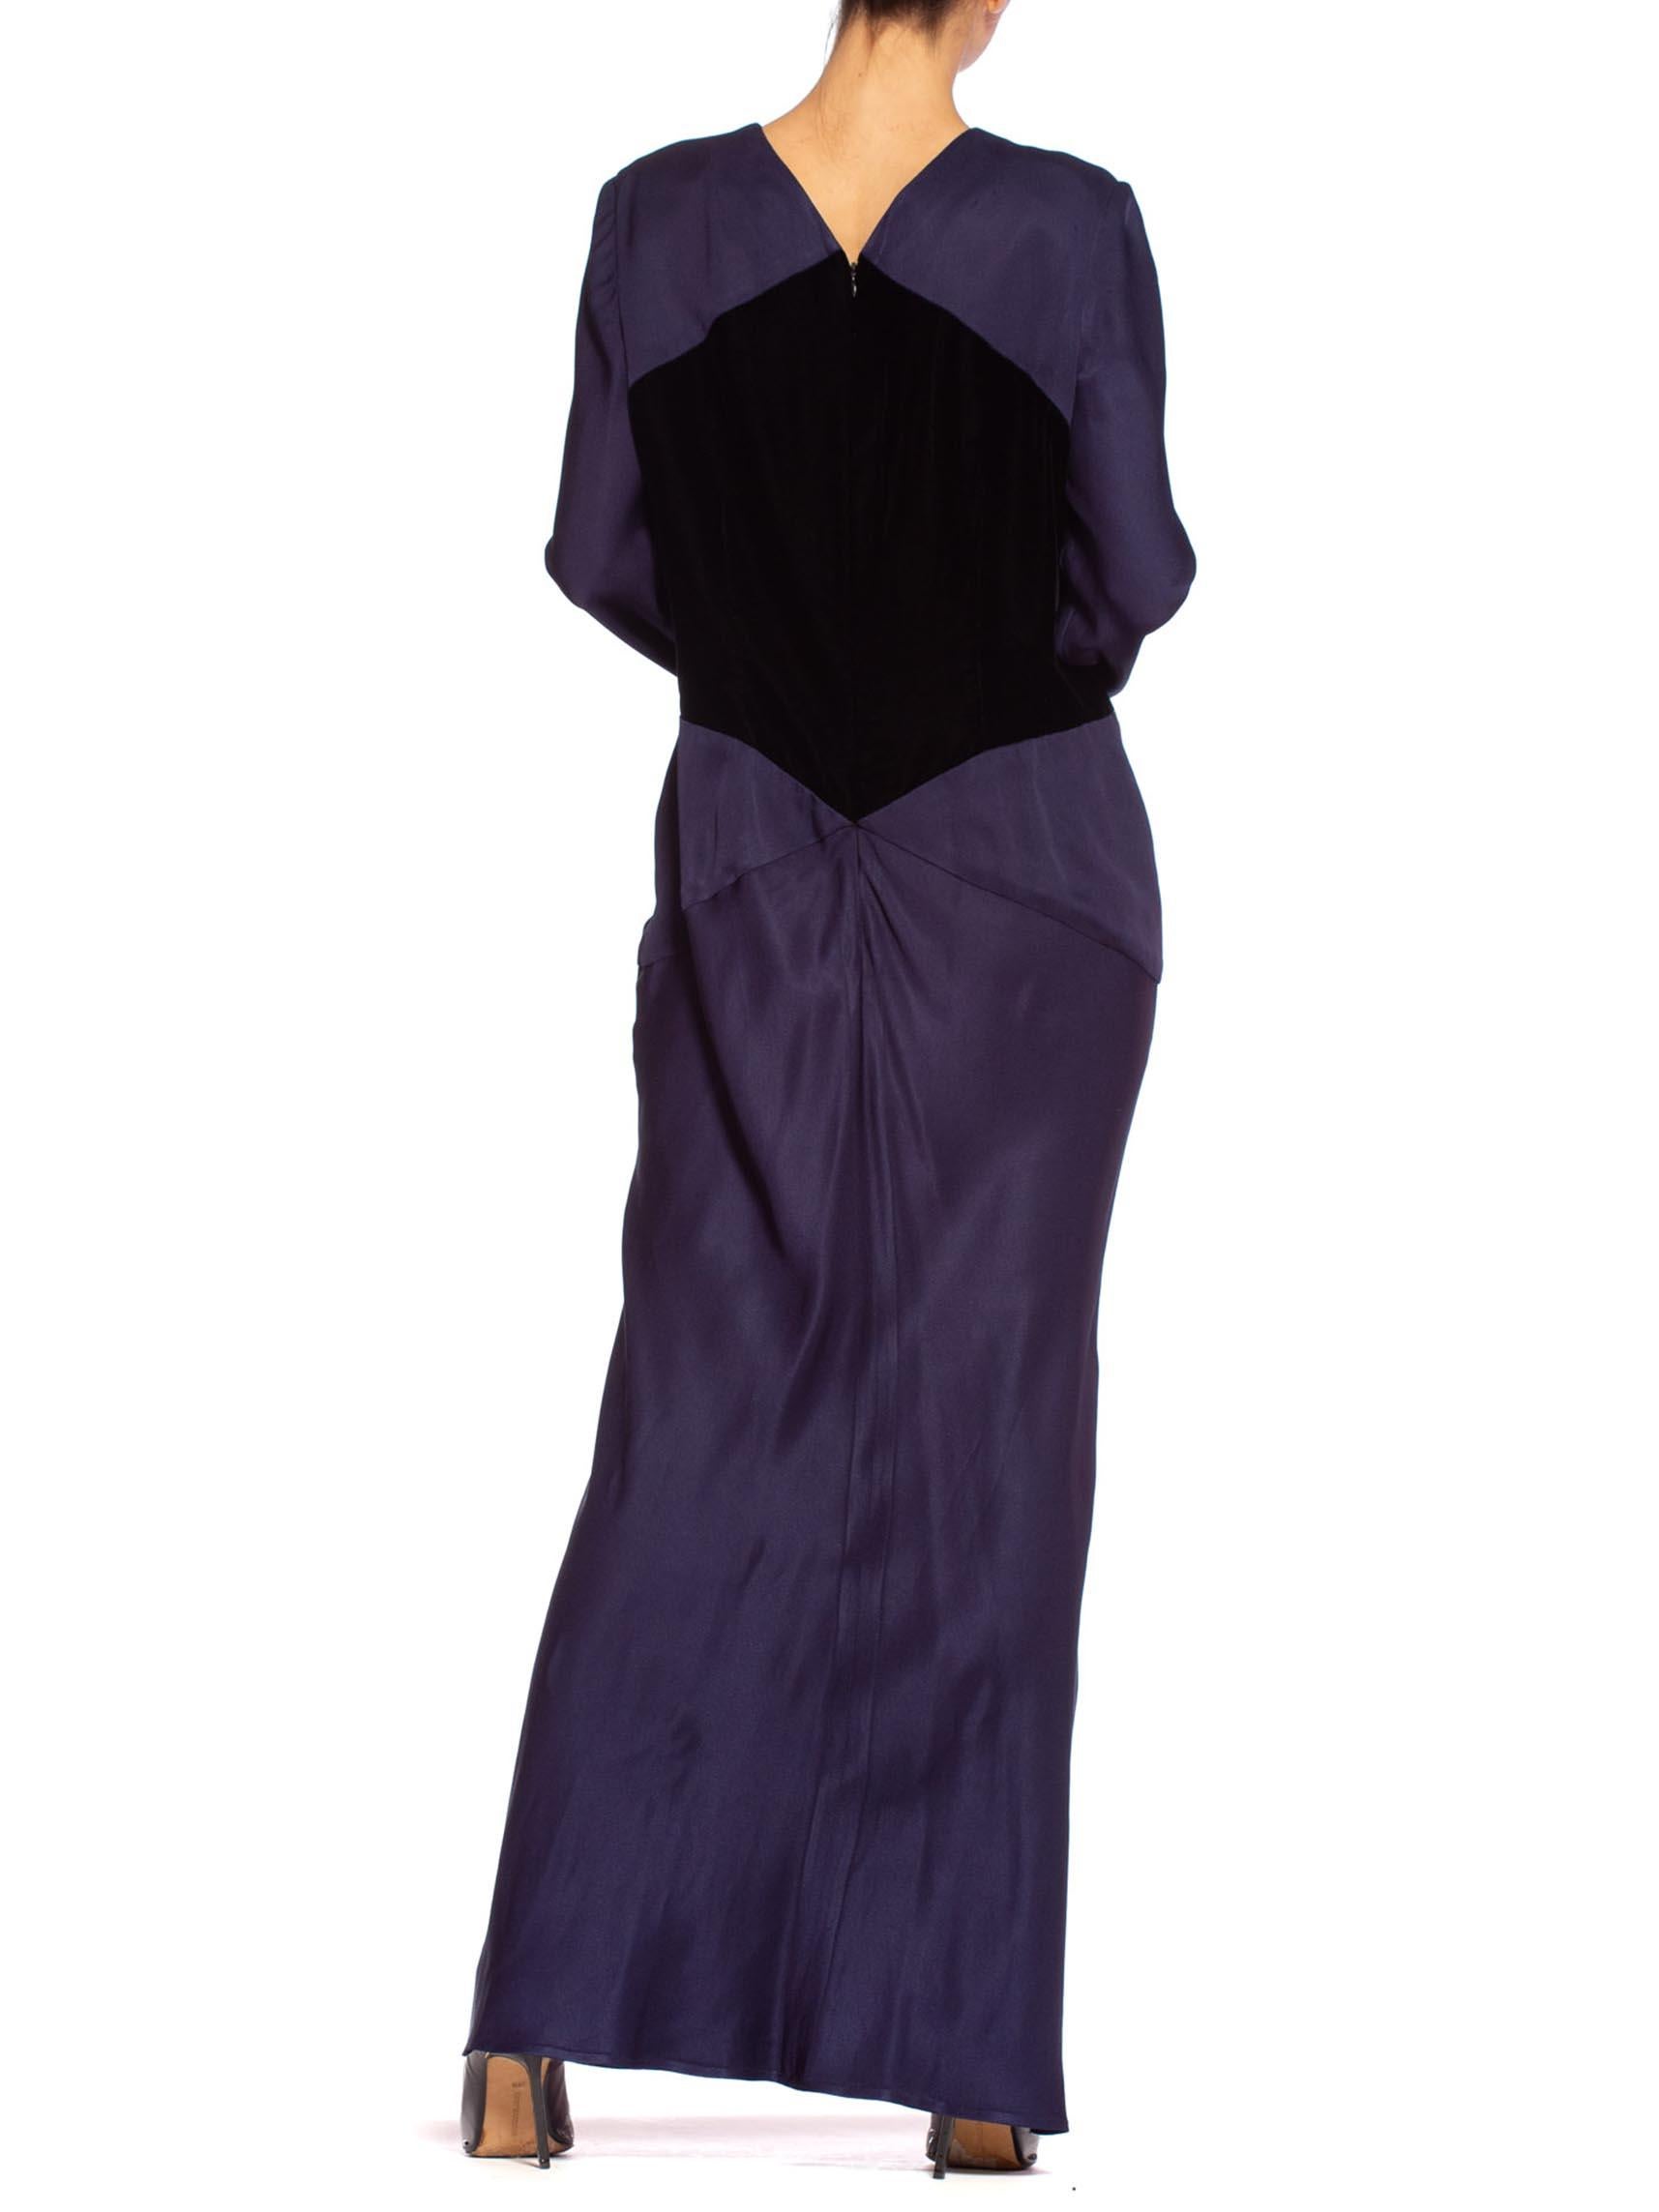 1980'S BILL BLASS Navy Blue Haute Couture Silk Crepe Back Satin Sleeved Gown Wi 5